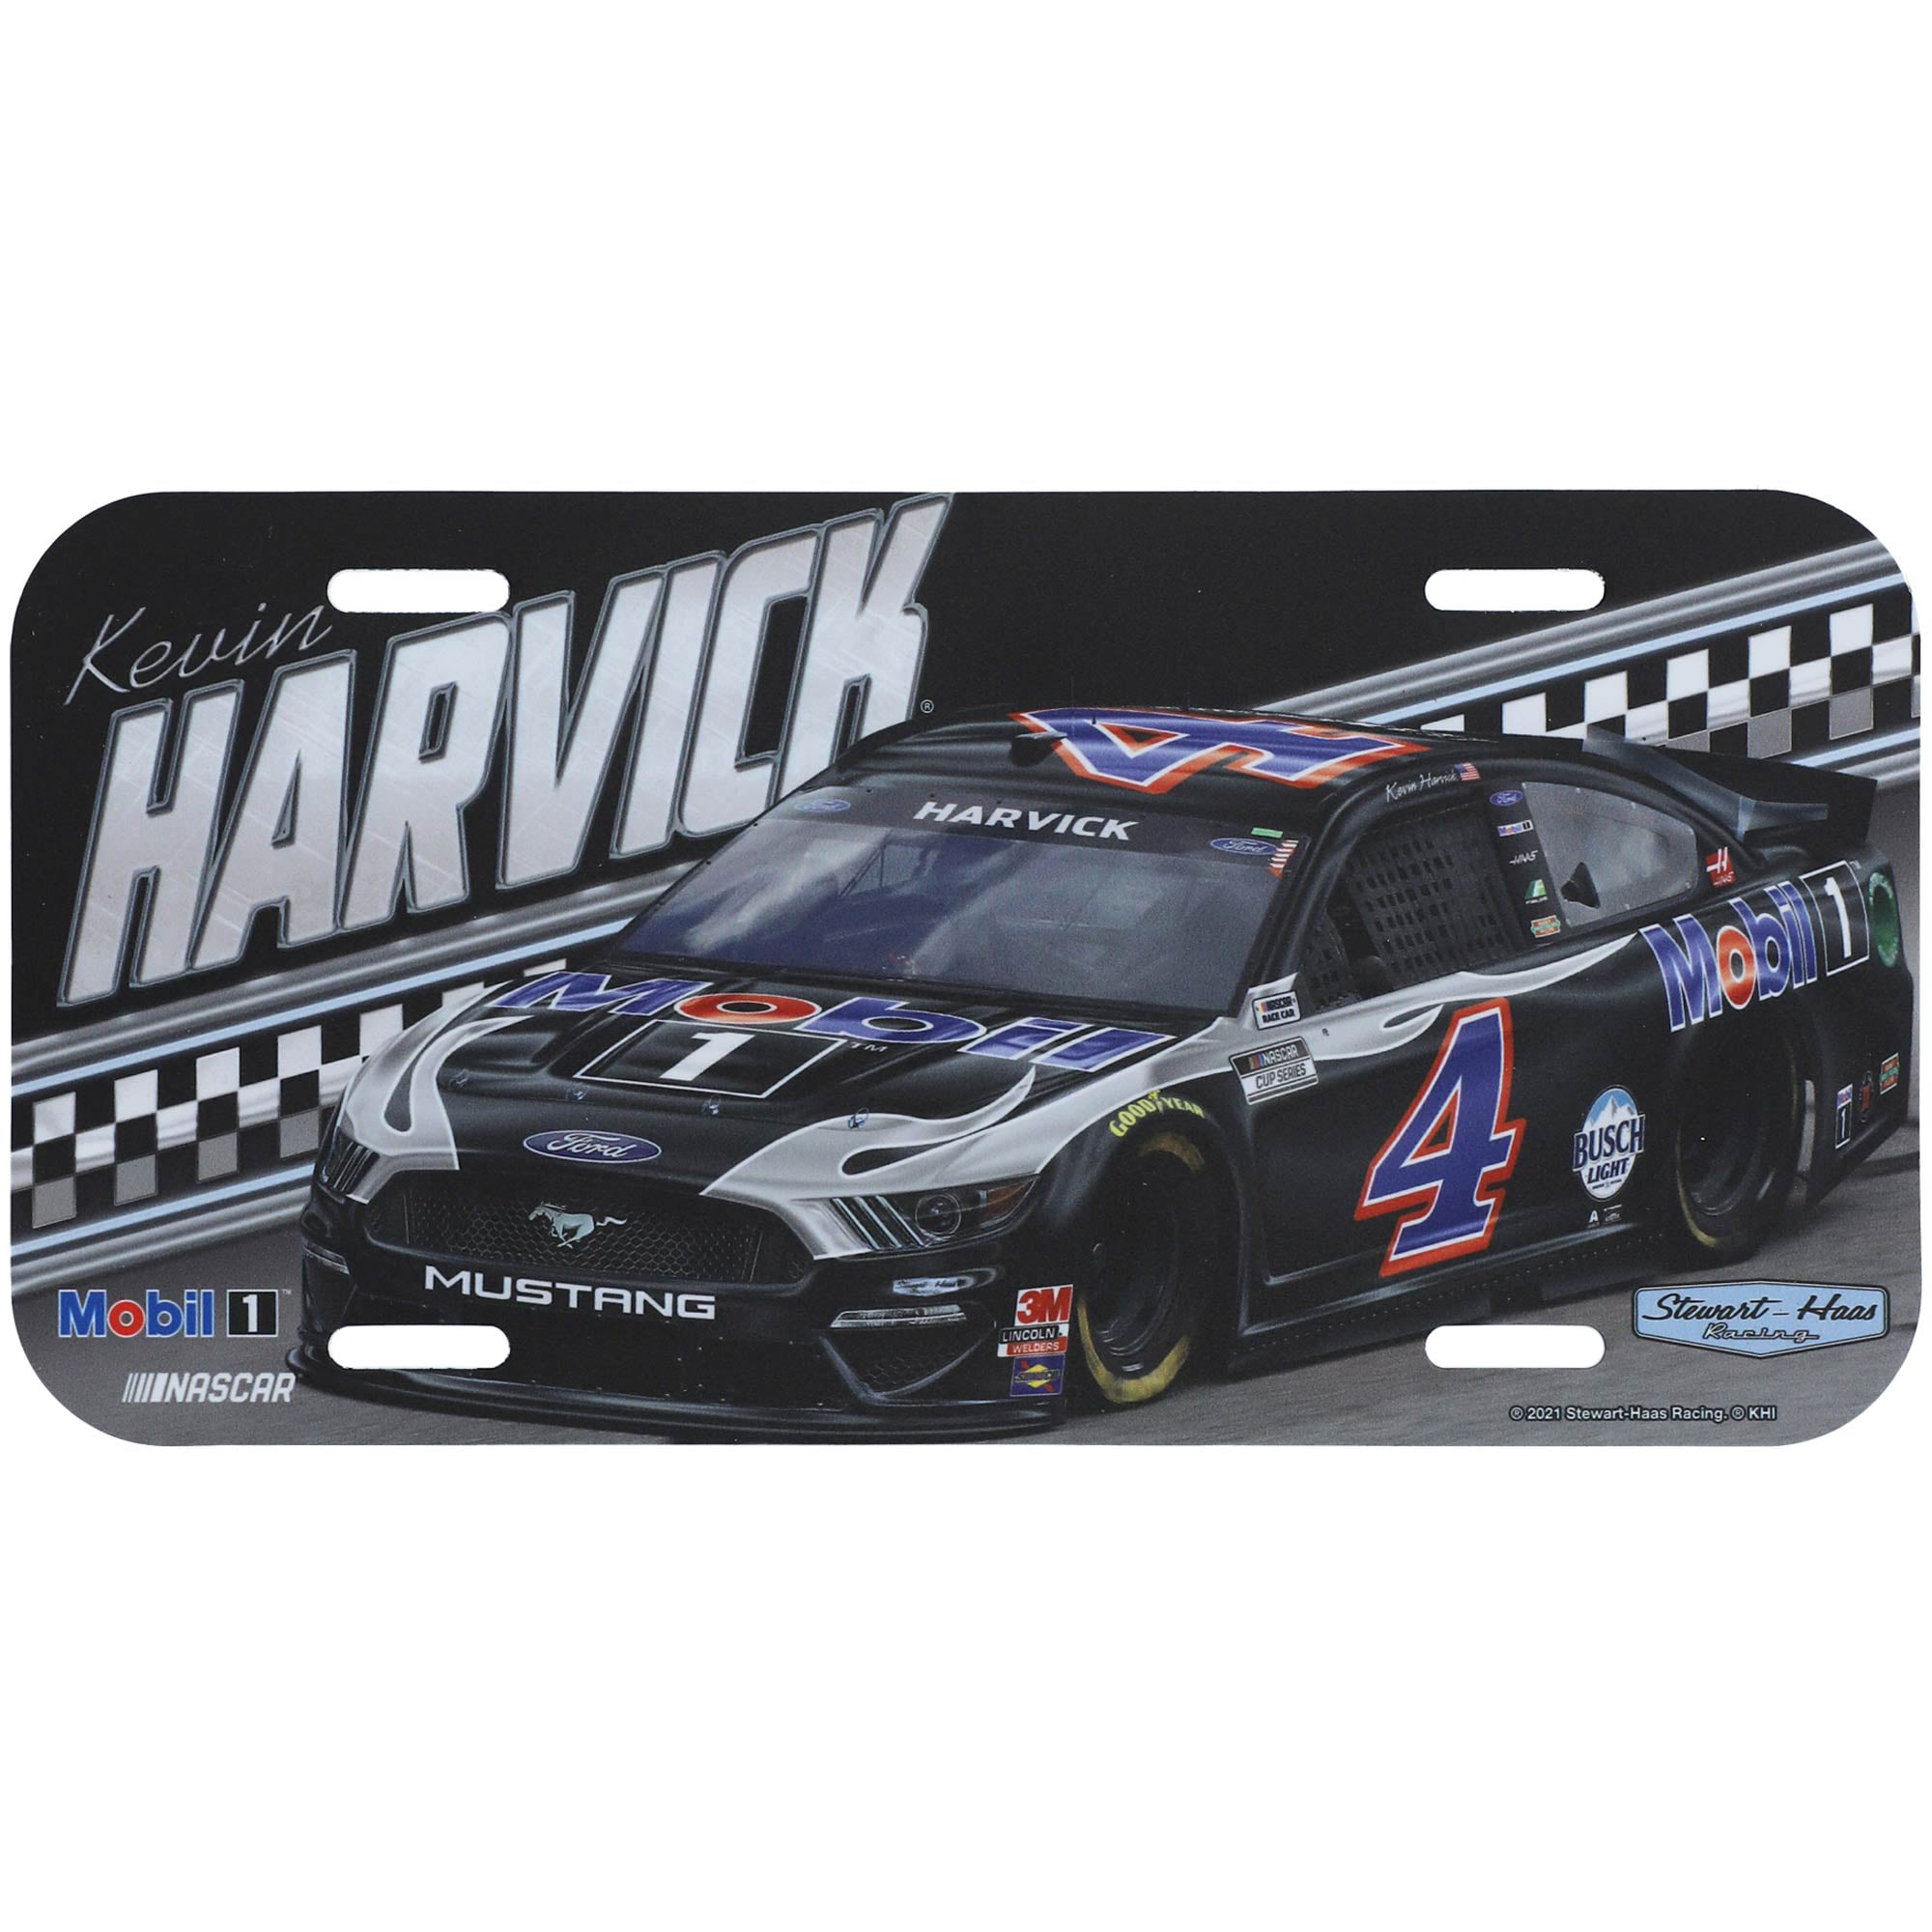 WinCraft Kevin Harvick Car License Plate